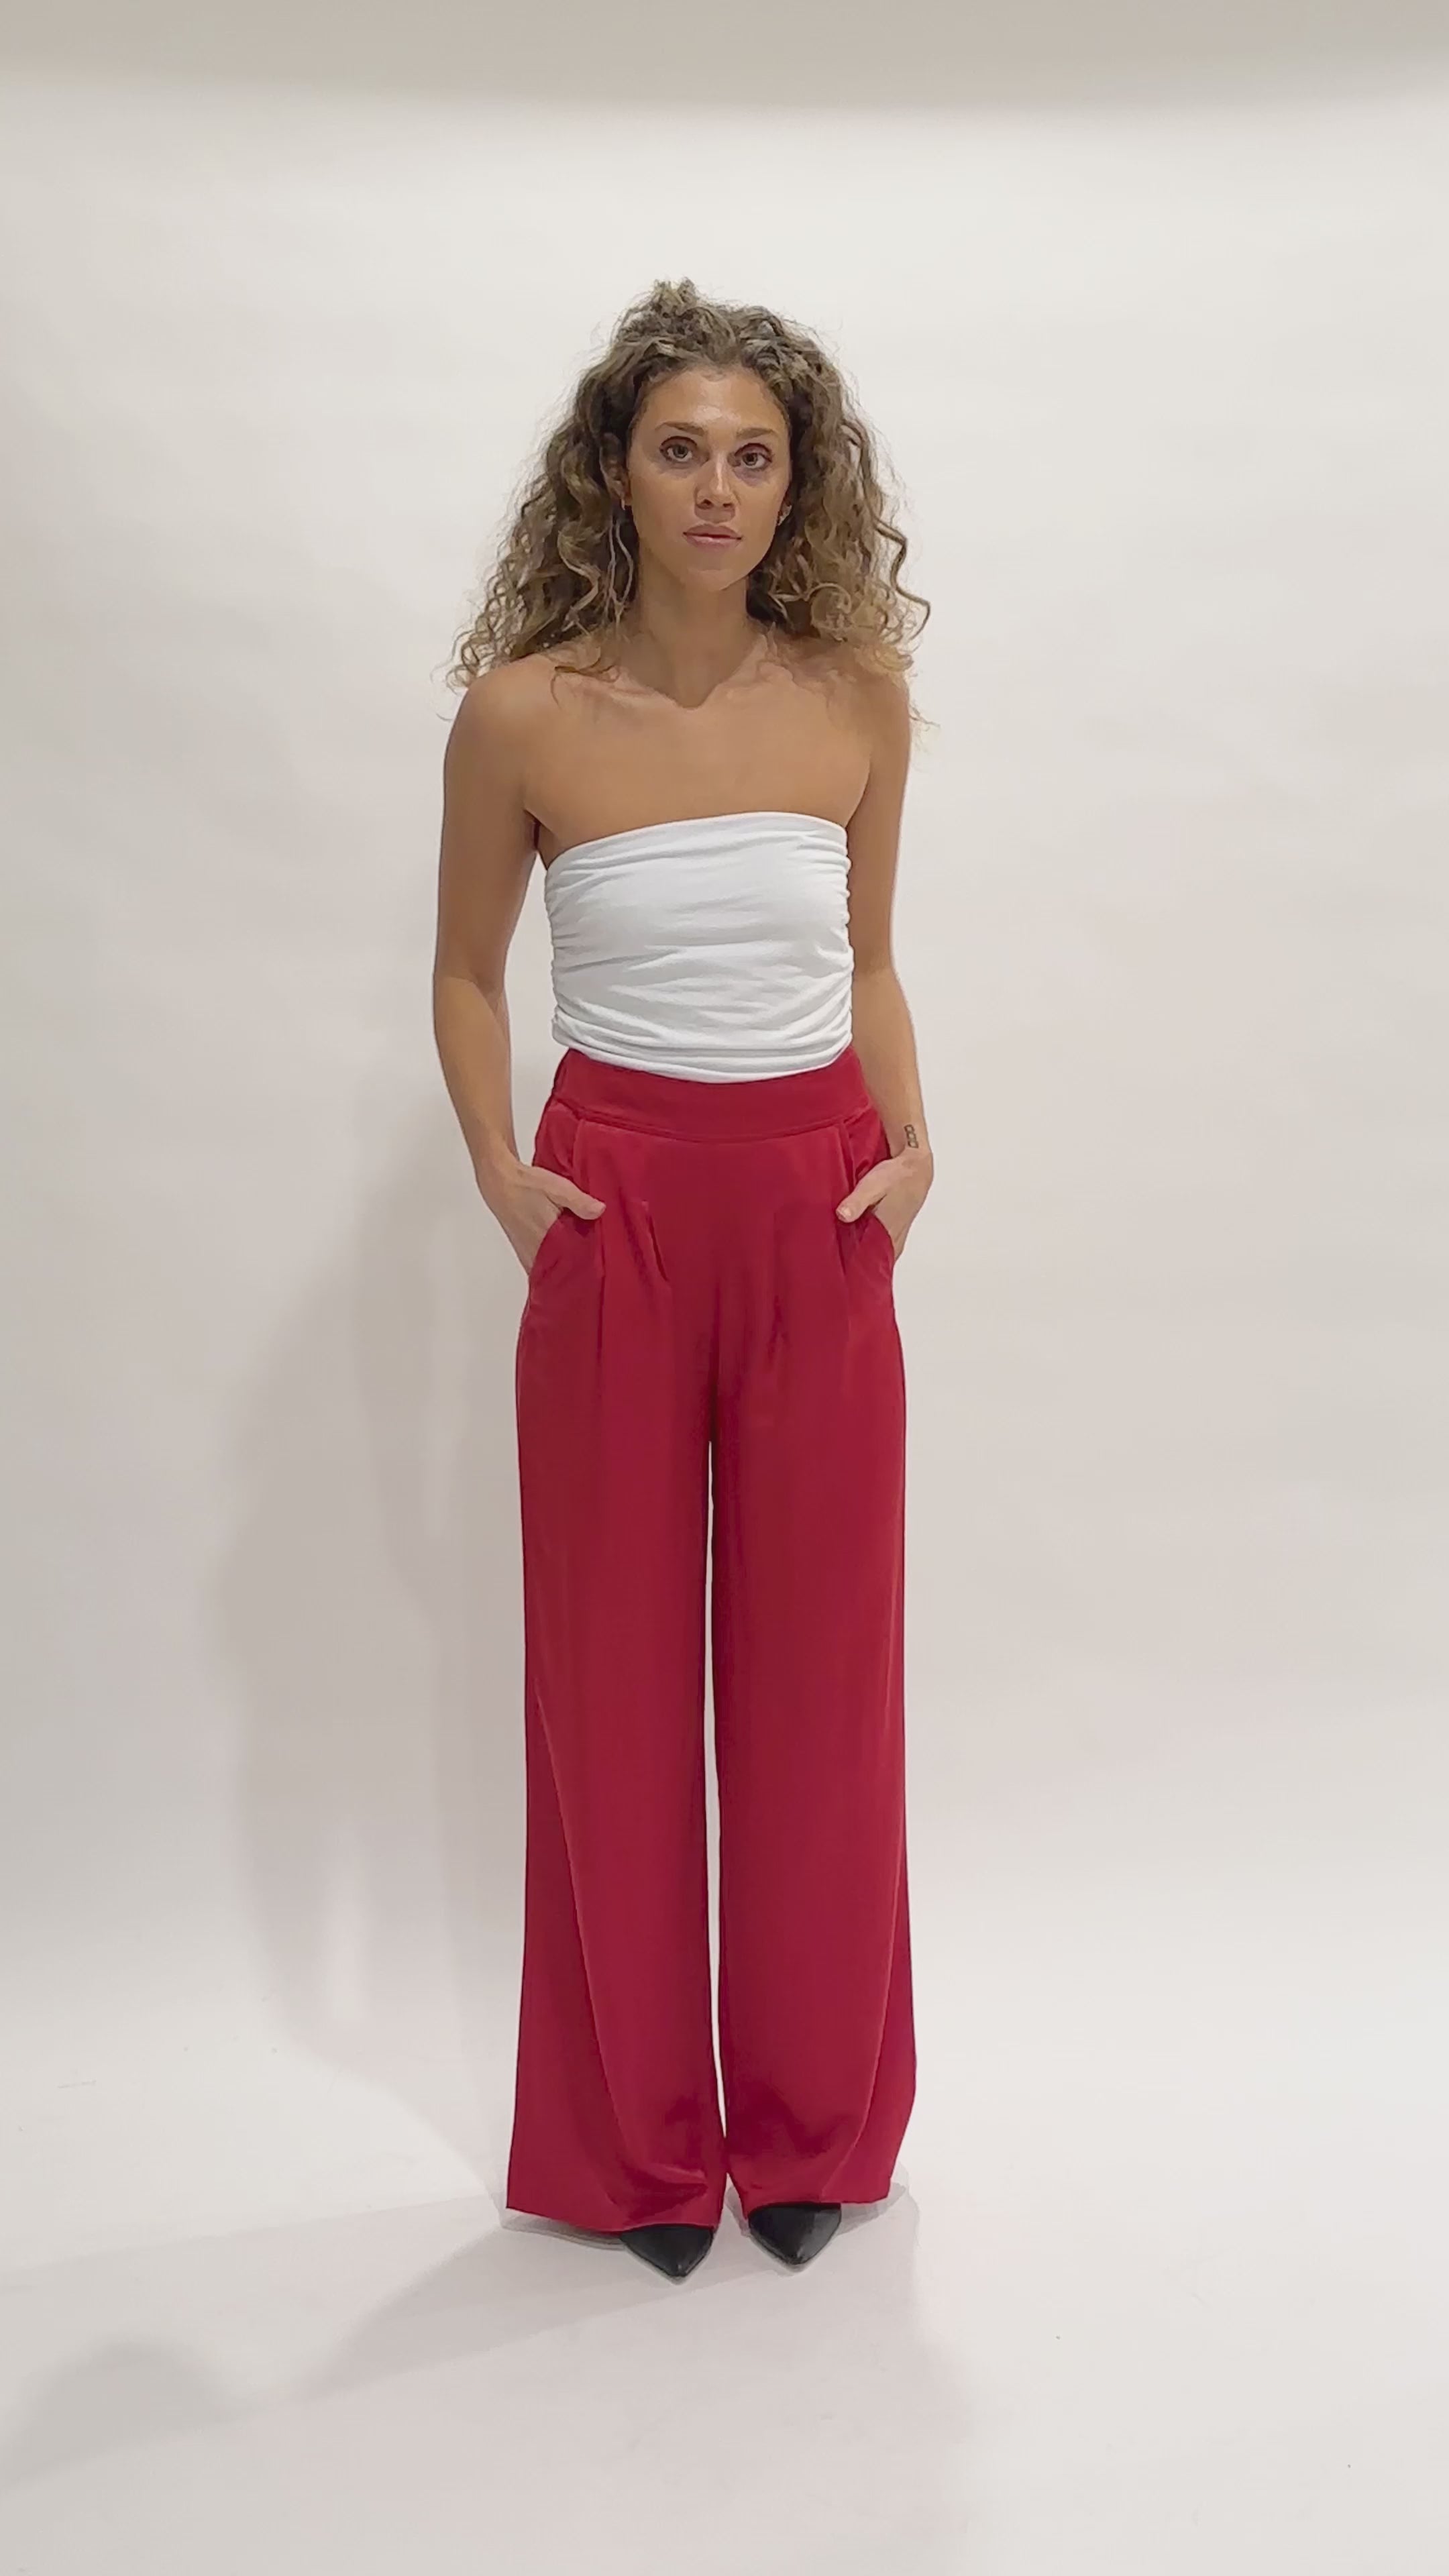 High Waisted Red Pants, Red Trousers, High Waisted Wide Leg Pants, Elegant  Trousers, Trousers With Pockets, Evening Pants -  Hong Kong